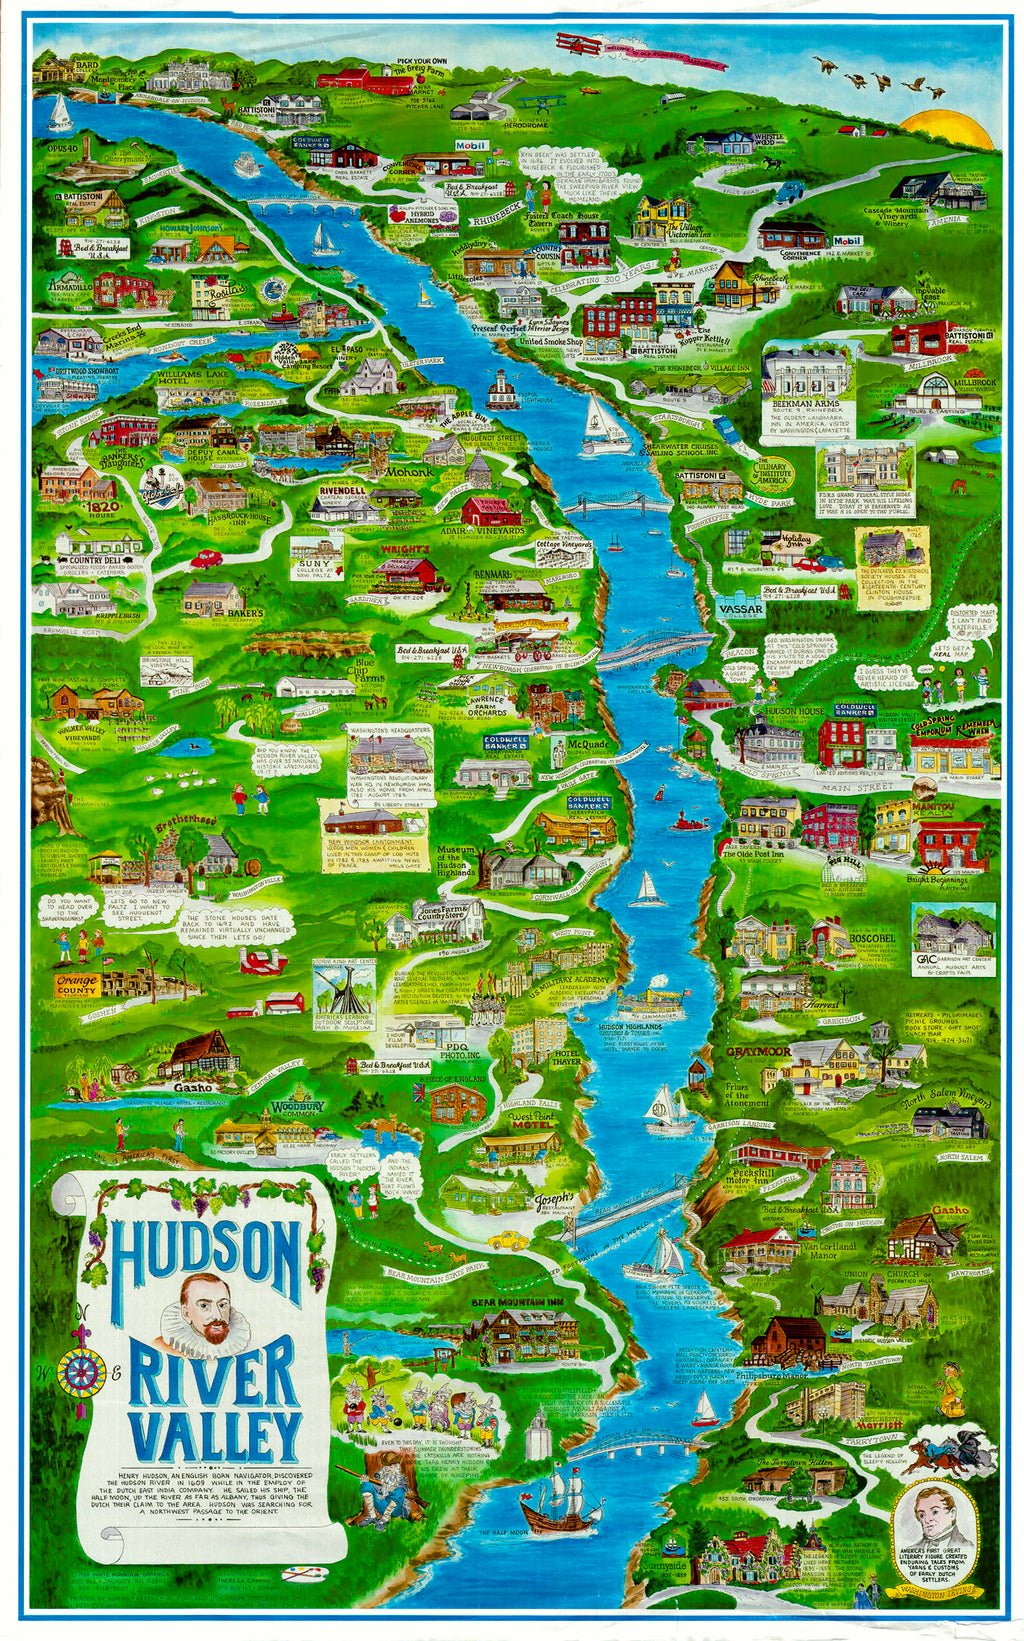 A playful pictorial advertising map for this stretch of the Hudson River Valley, from Tarrytown, up to Bard College and Annandale On Hudson. Full of notations for Inns and Hotels, as well as Vineyards and Orchards. Includes many of the regional colleges like Vassar and SUNY. Does include the "Appalachian Trail" as it crosses the region. 